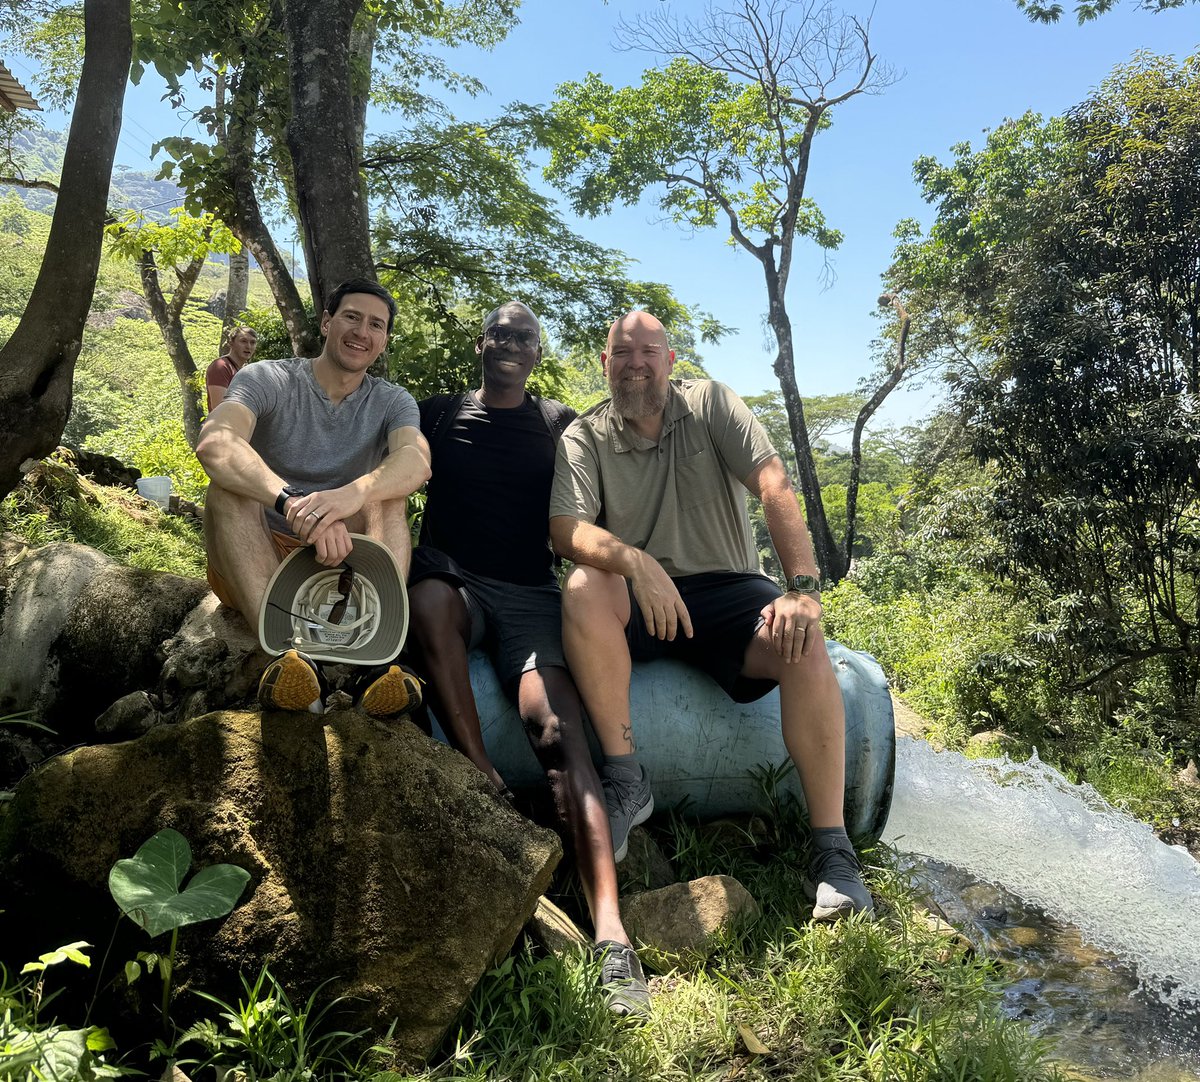 I had the opportunity to visit off-grid hydro and geothermal Bitcoin mining sites in Malawi and Kenya. My mind is completely blown. Still processing, will publish an essay on this soon. TLDR: Satoshi’s invention will completely revolutionize power generation in Africa and beyond